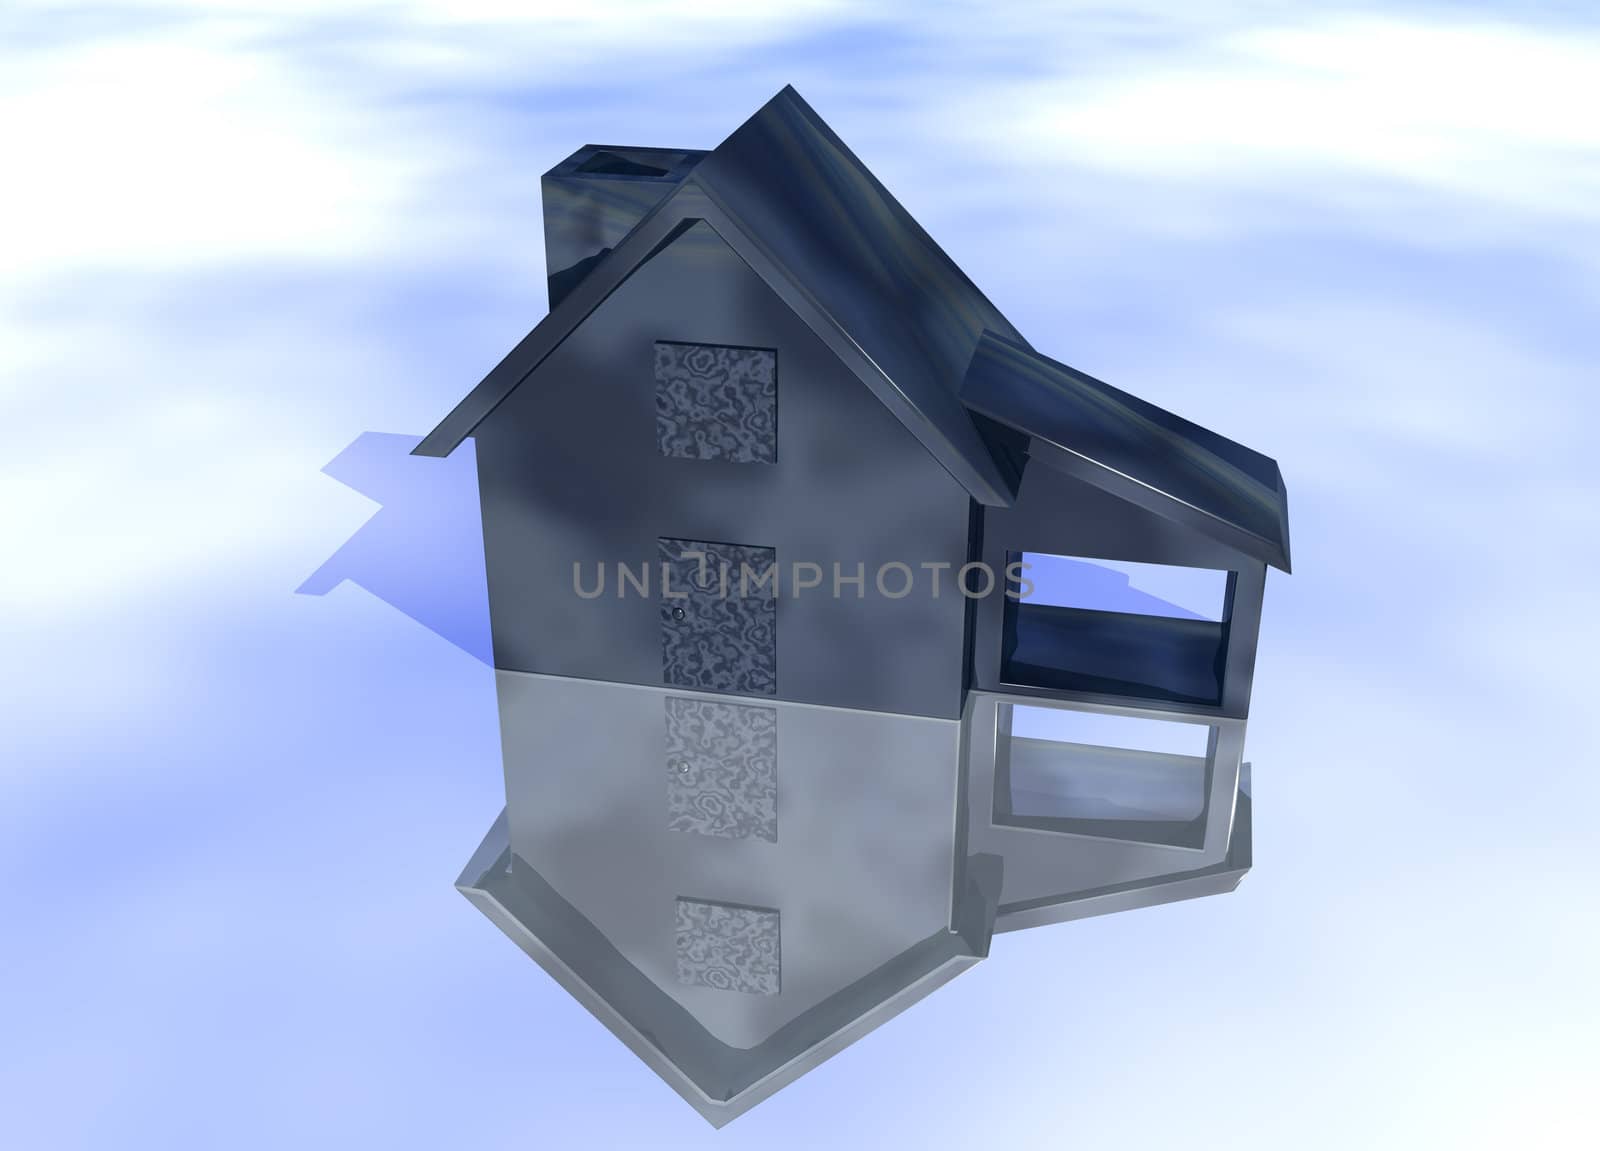 Abstract Oily Black House Model on Blue-Sky Background with Reflection Concept Fuel Expenses or Rising Prices and Bad Environment